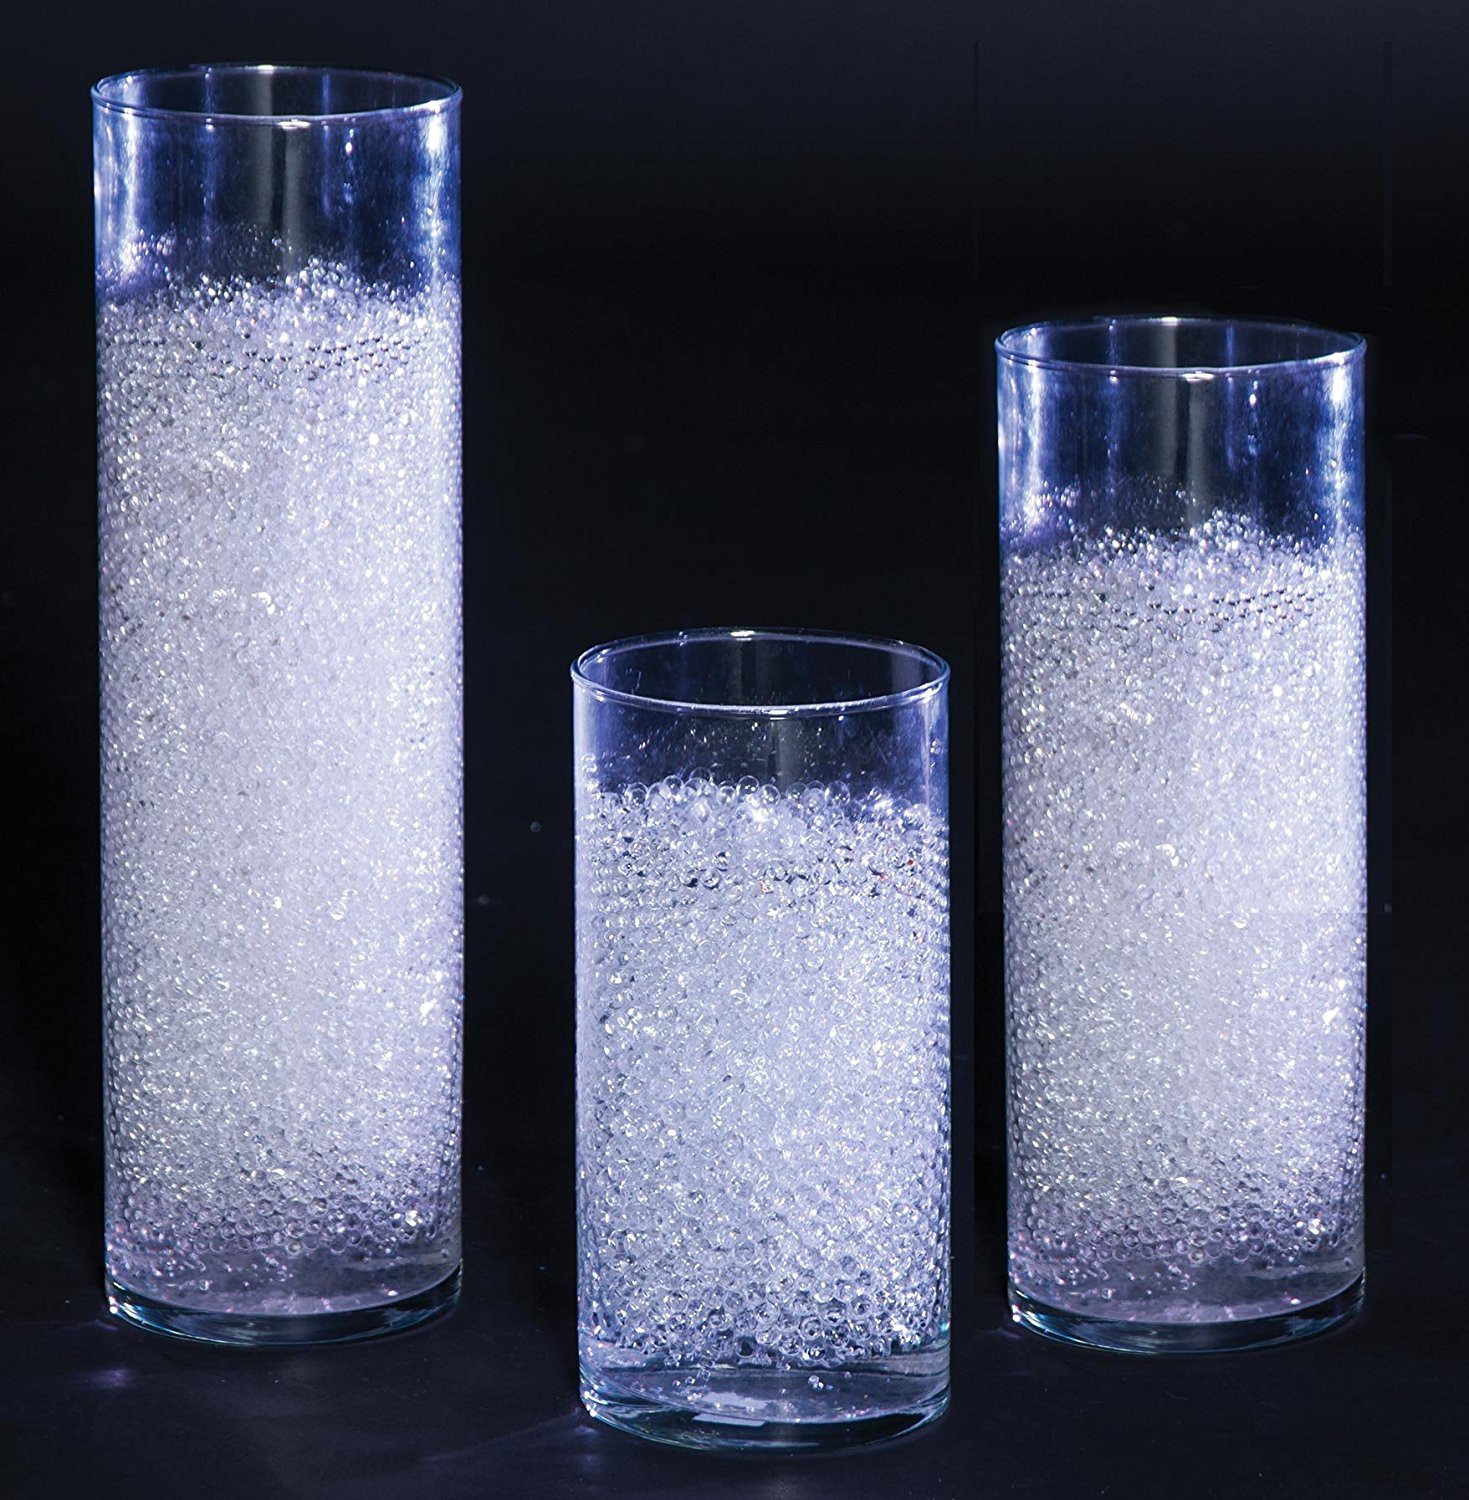 23 attractive Eastland Glass Cylinder Vases Set Of 4 2024 free download eastland glass cylinder vases set of 4 of cheap 3 set vases find 3 set vases deals on line at alibaba com intended for get quotations ac2b7 glass cylinder vases set set of 3 17 inches high 1